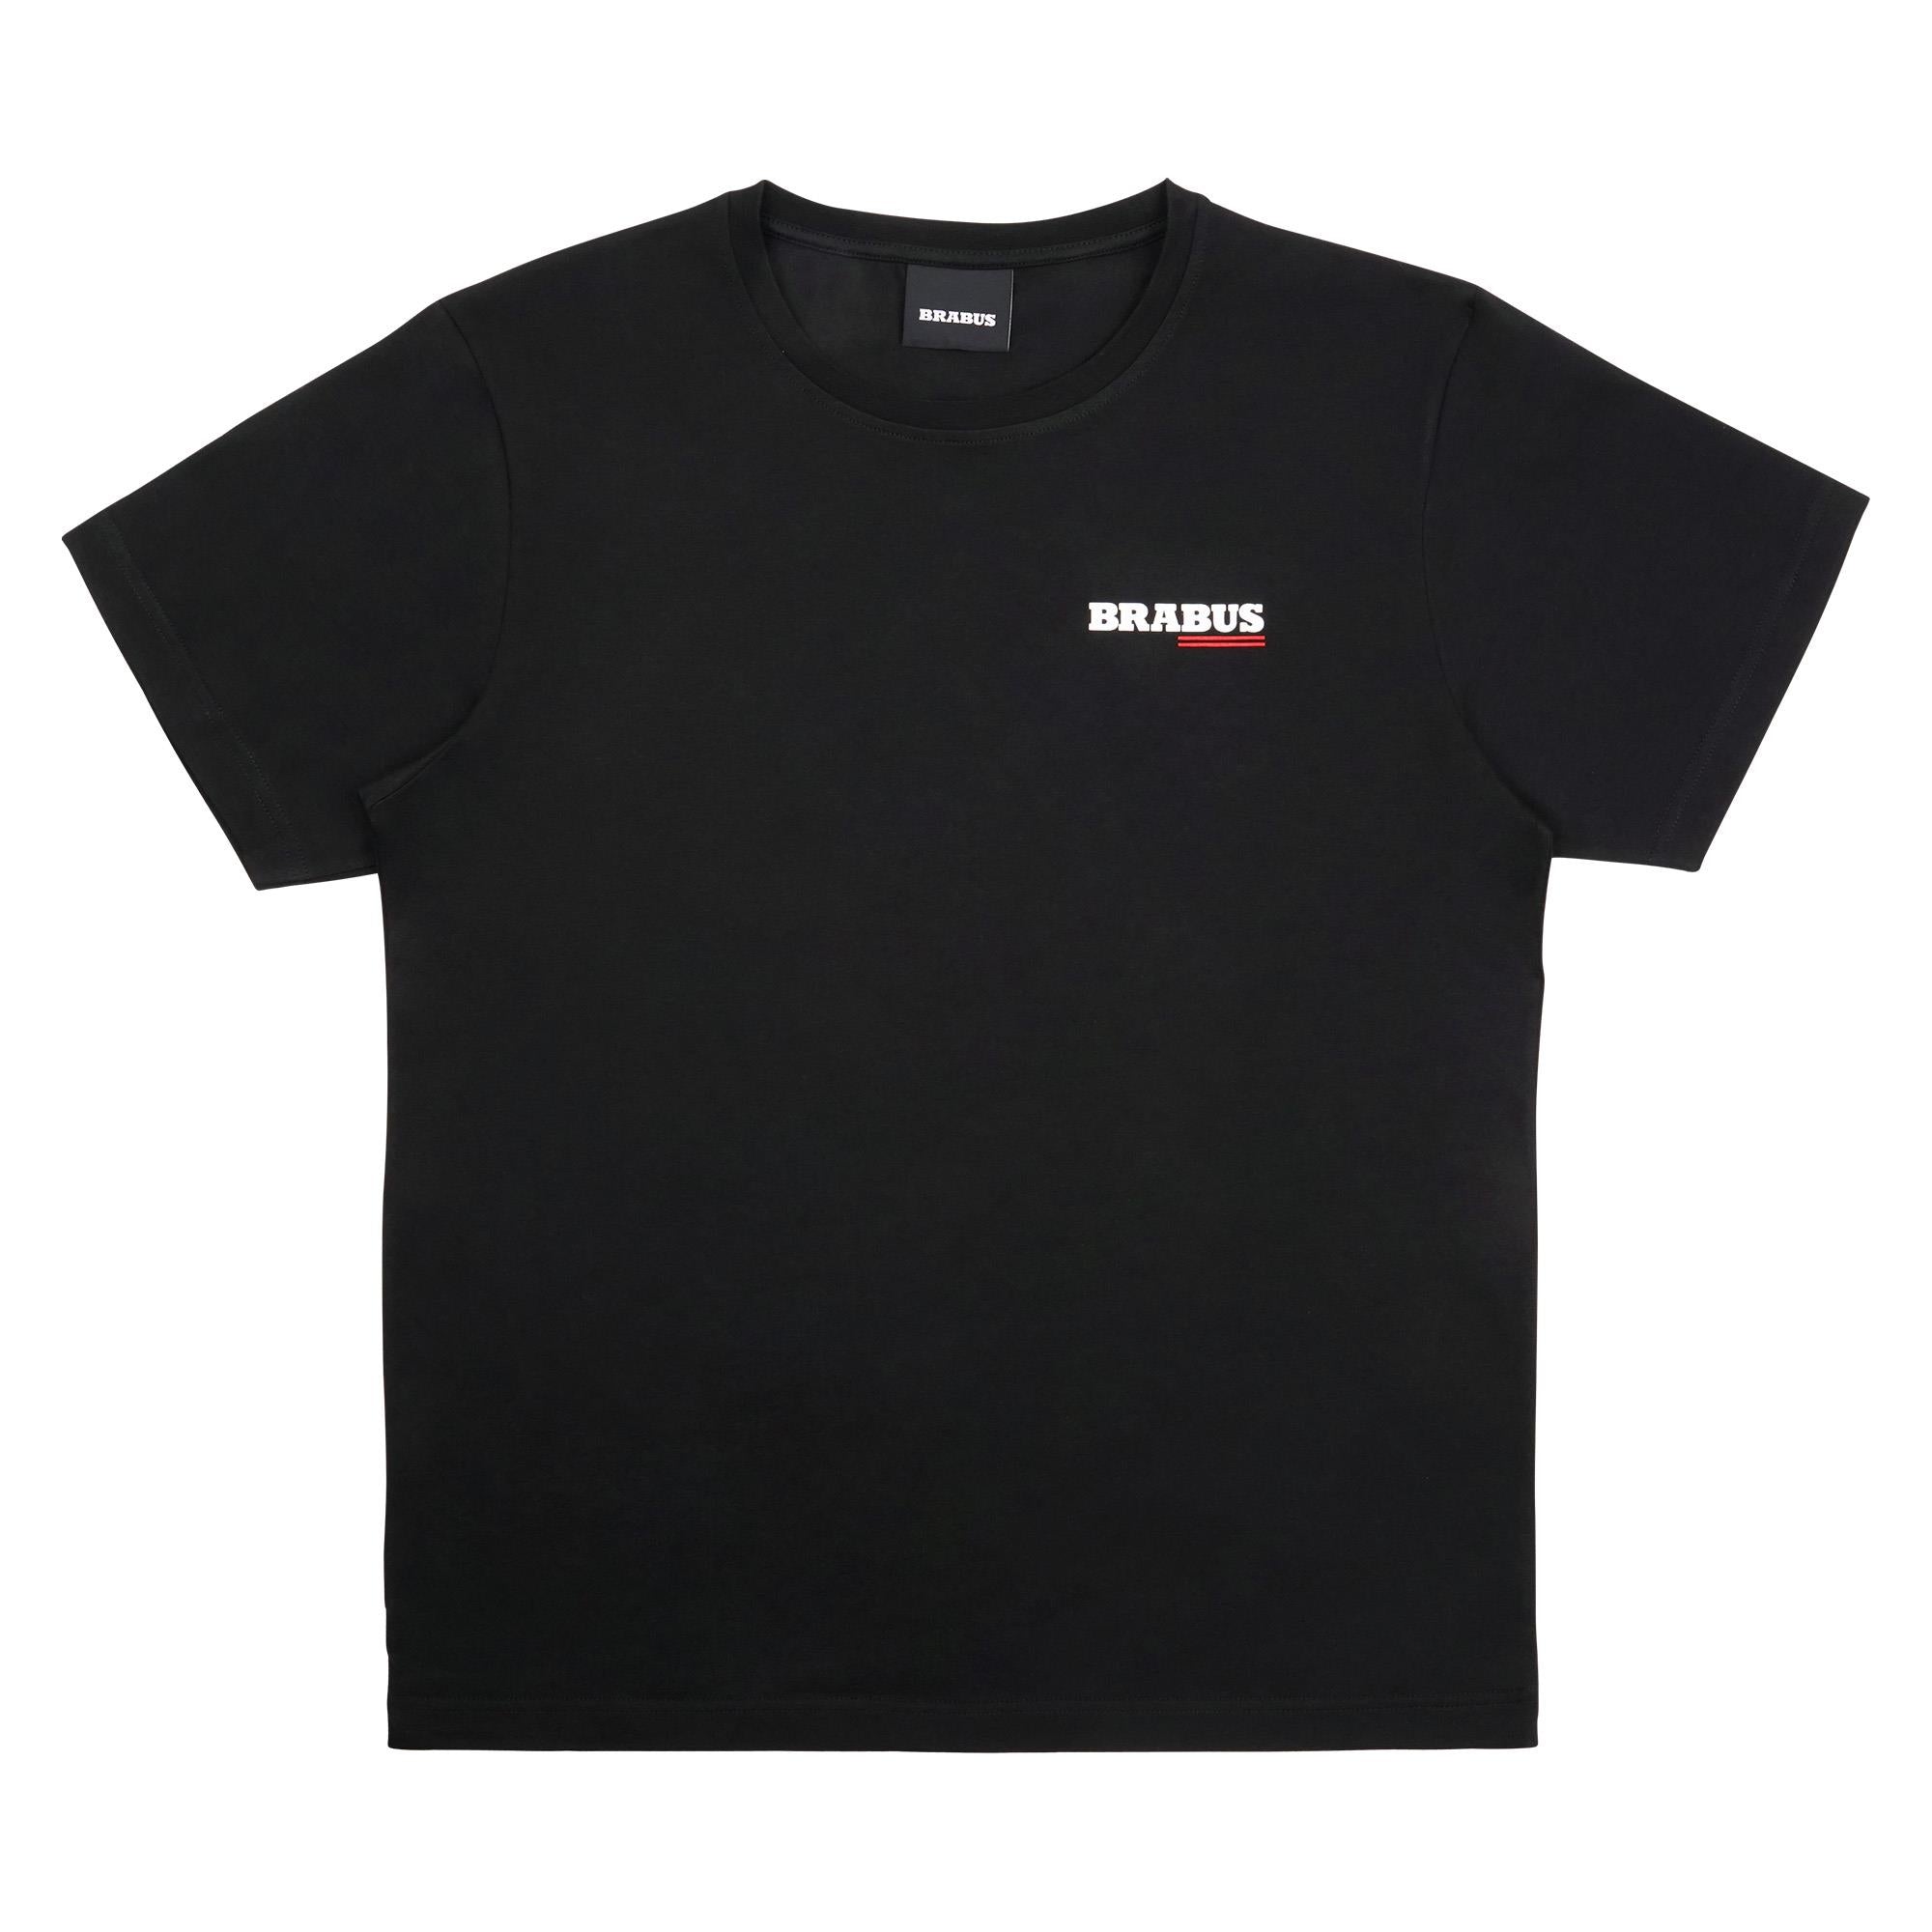 T-shirt with underlined logo 